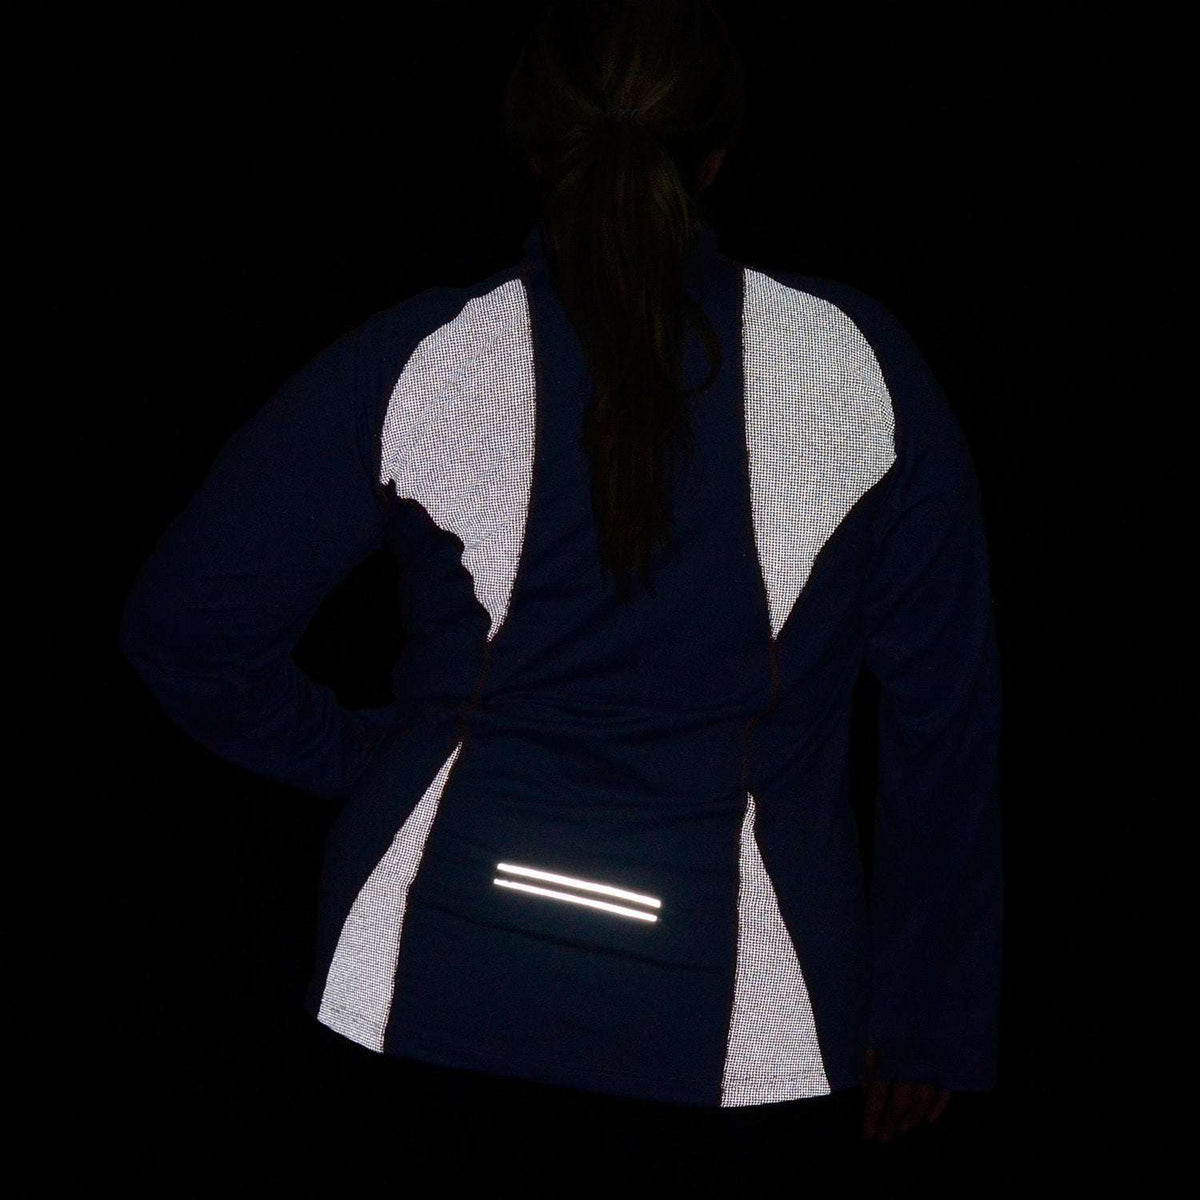 runLITE Reflective Women's Pullover in Periwinkle/White